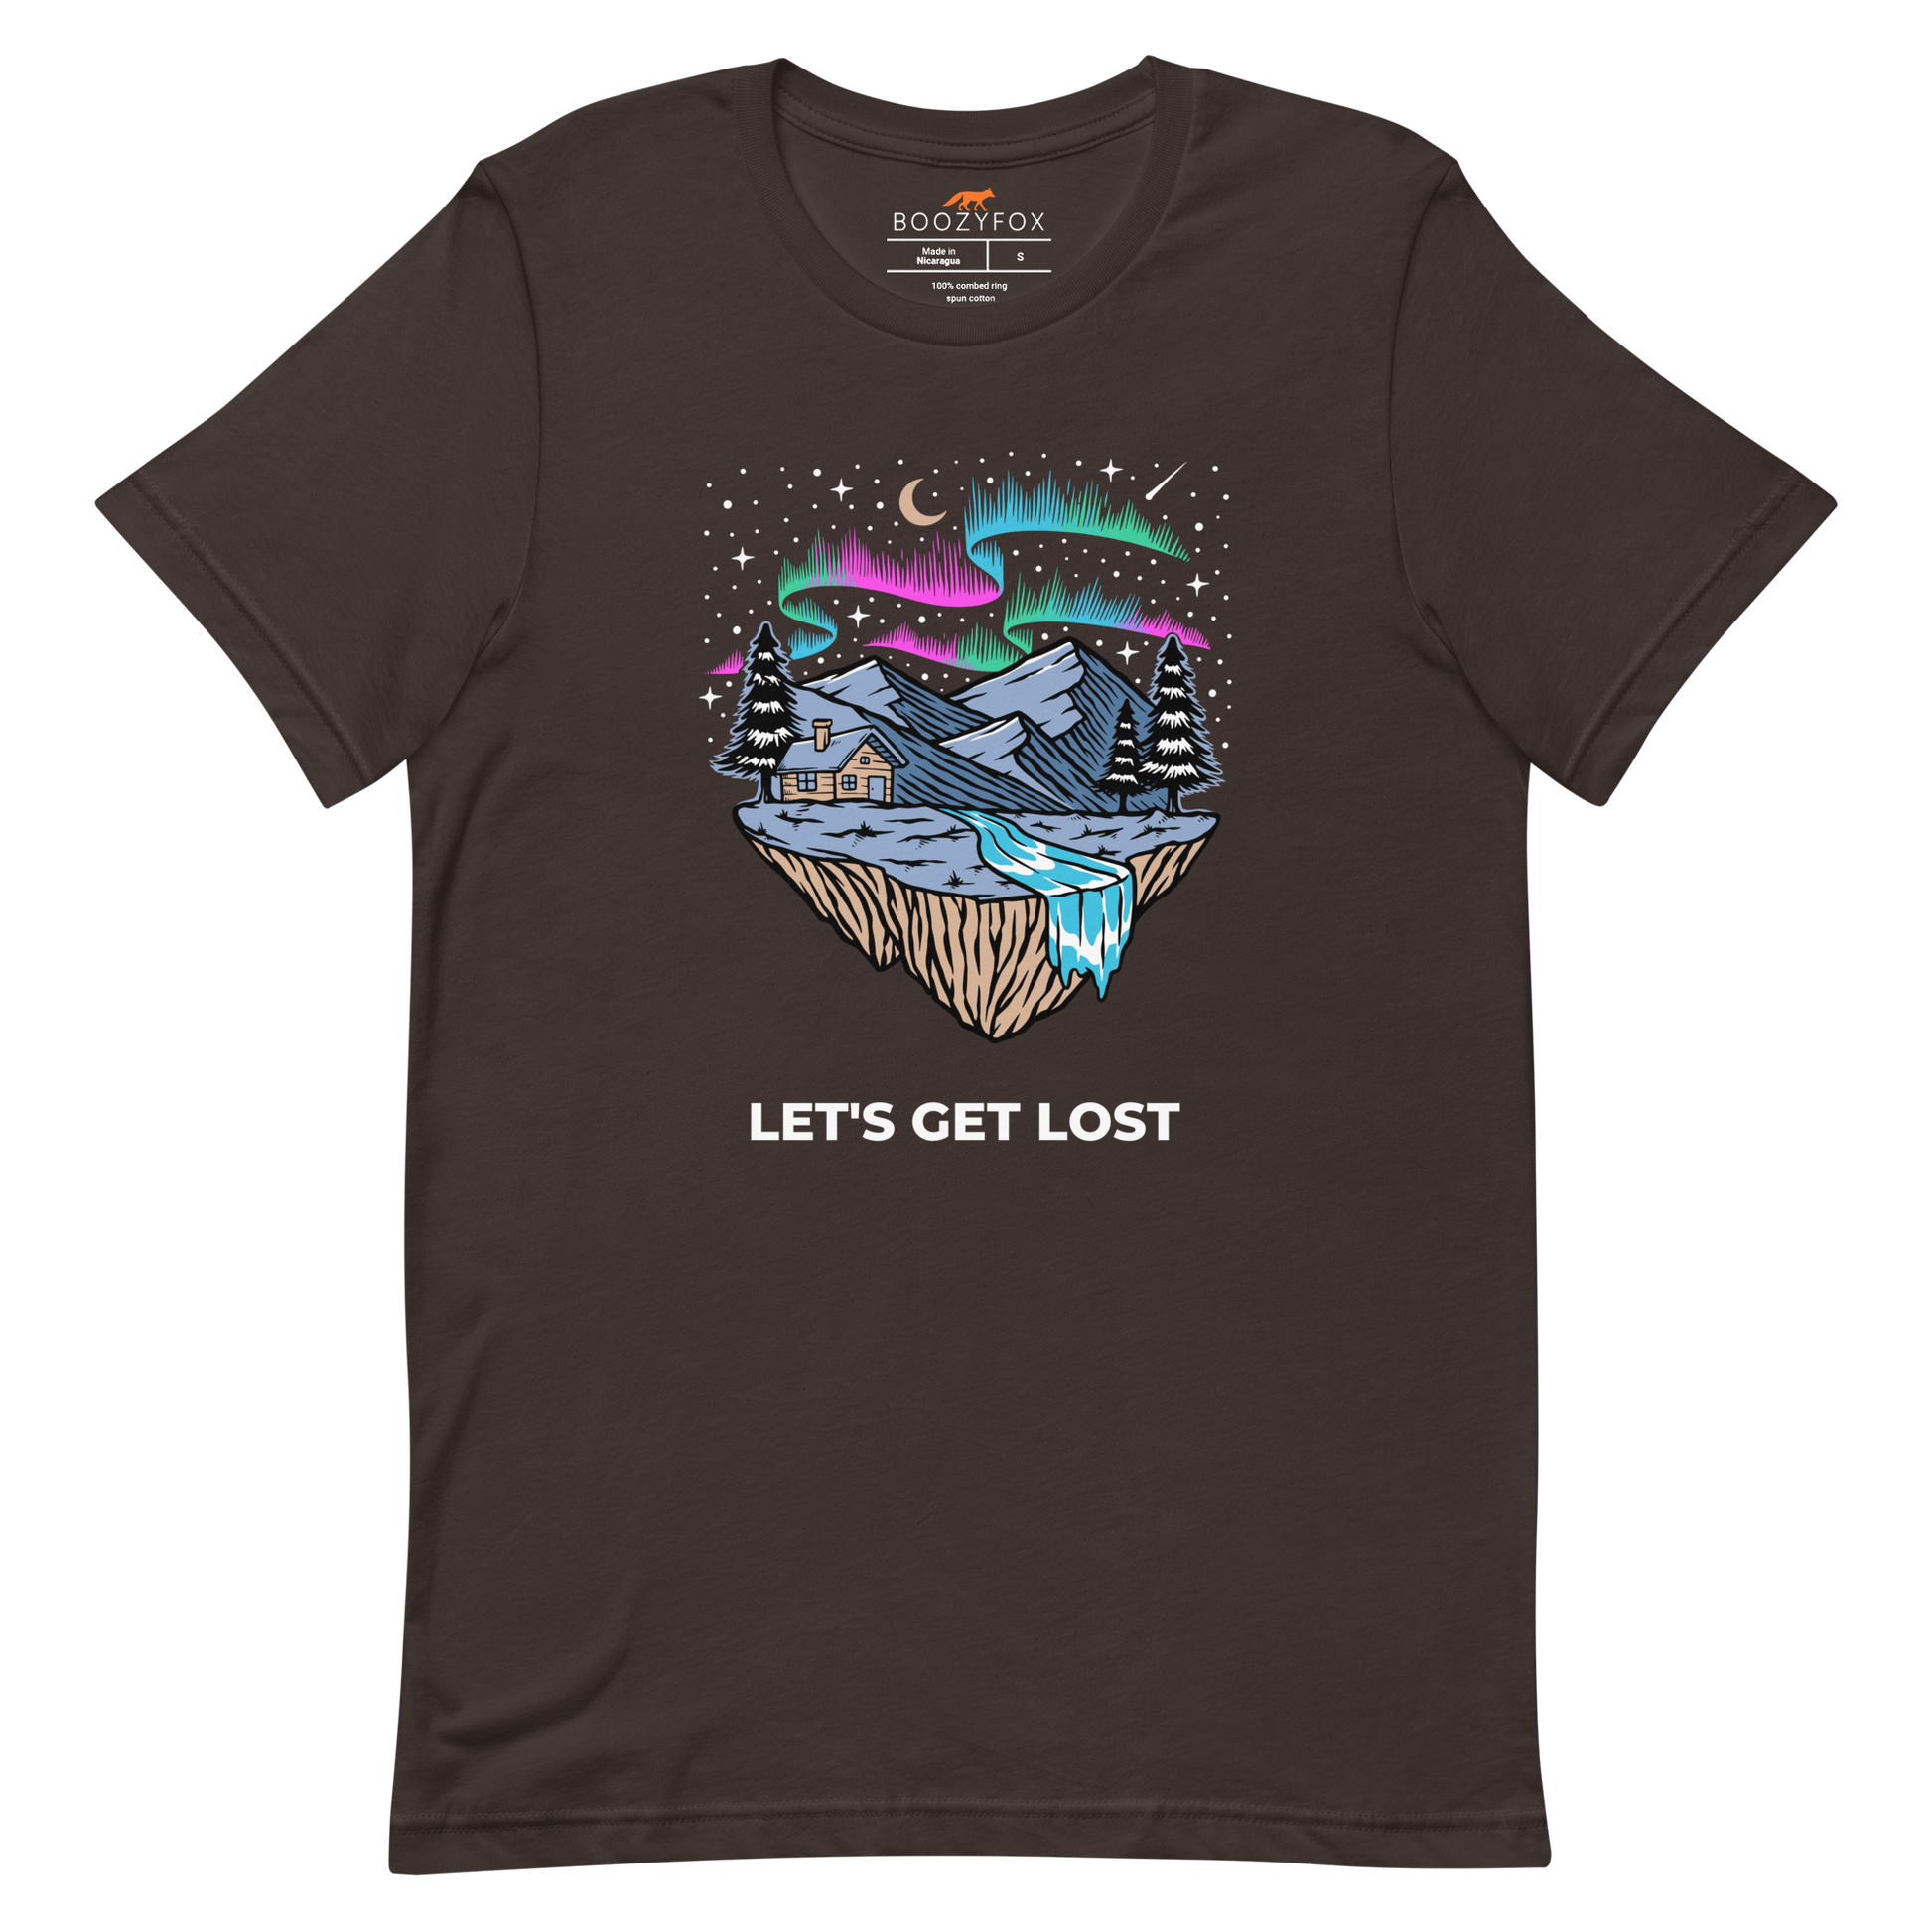 Brown Premium Let's Get Lost Tee featuring a mesmerizing night sky, adorned with stars and aurora borealis graphic on the chest - Cool Graphic Northern Lights Tees - Boozy Fox